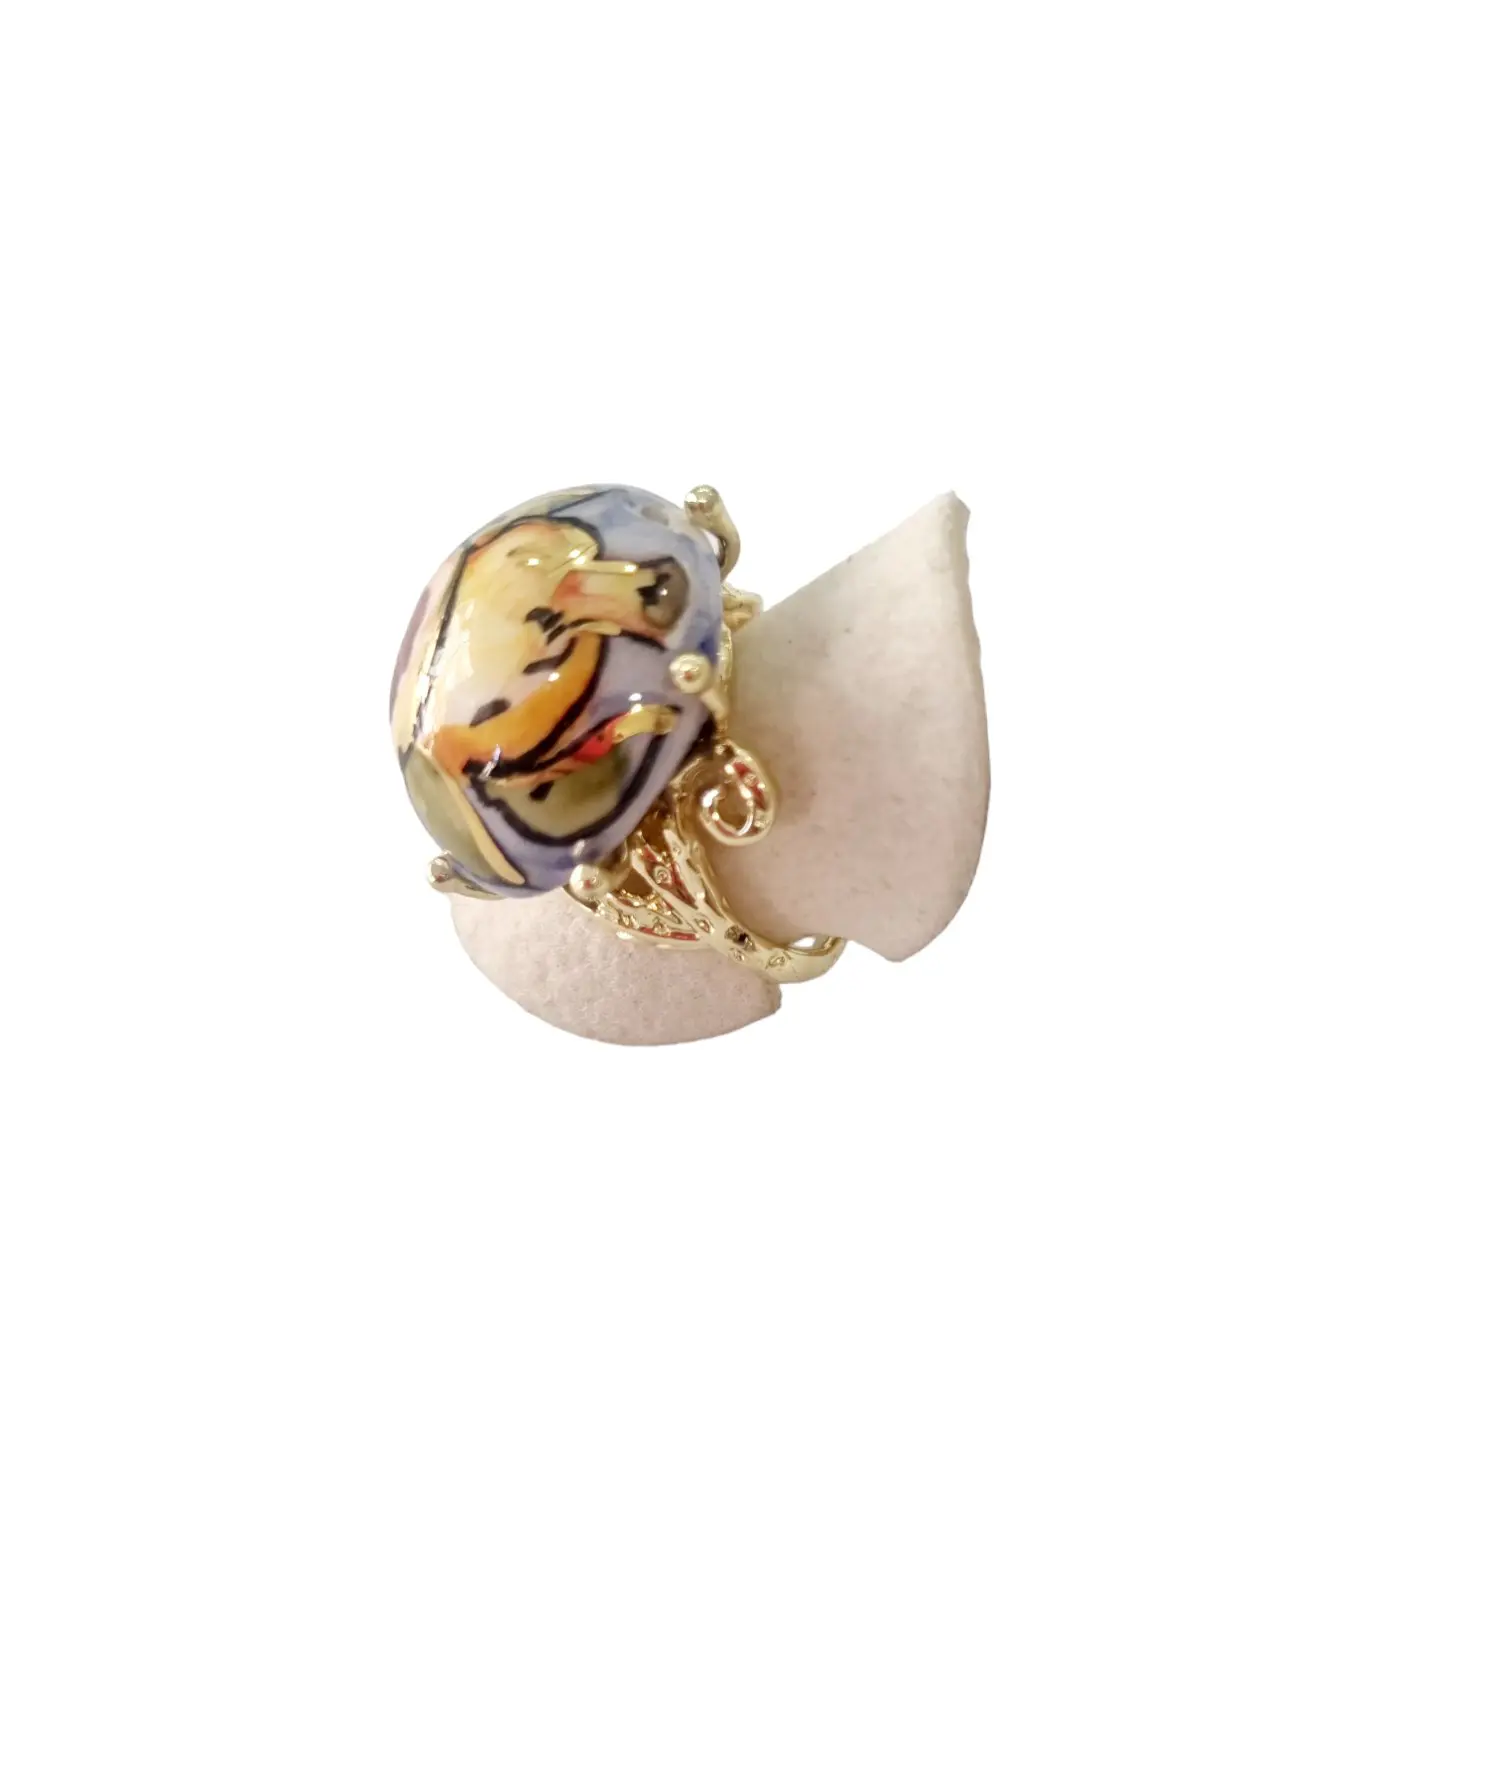 Adjustable ring on brass base with pomegranates painted on Caltagirone ceramic.